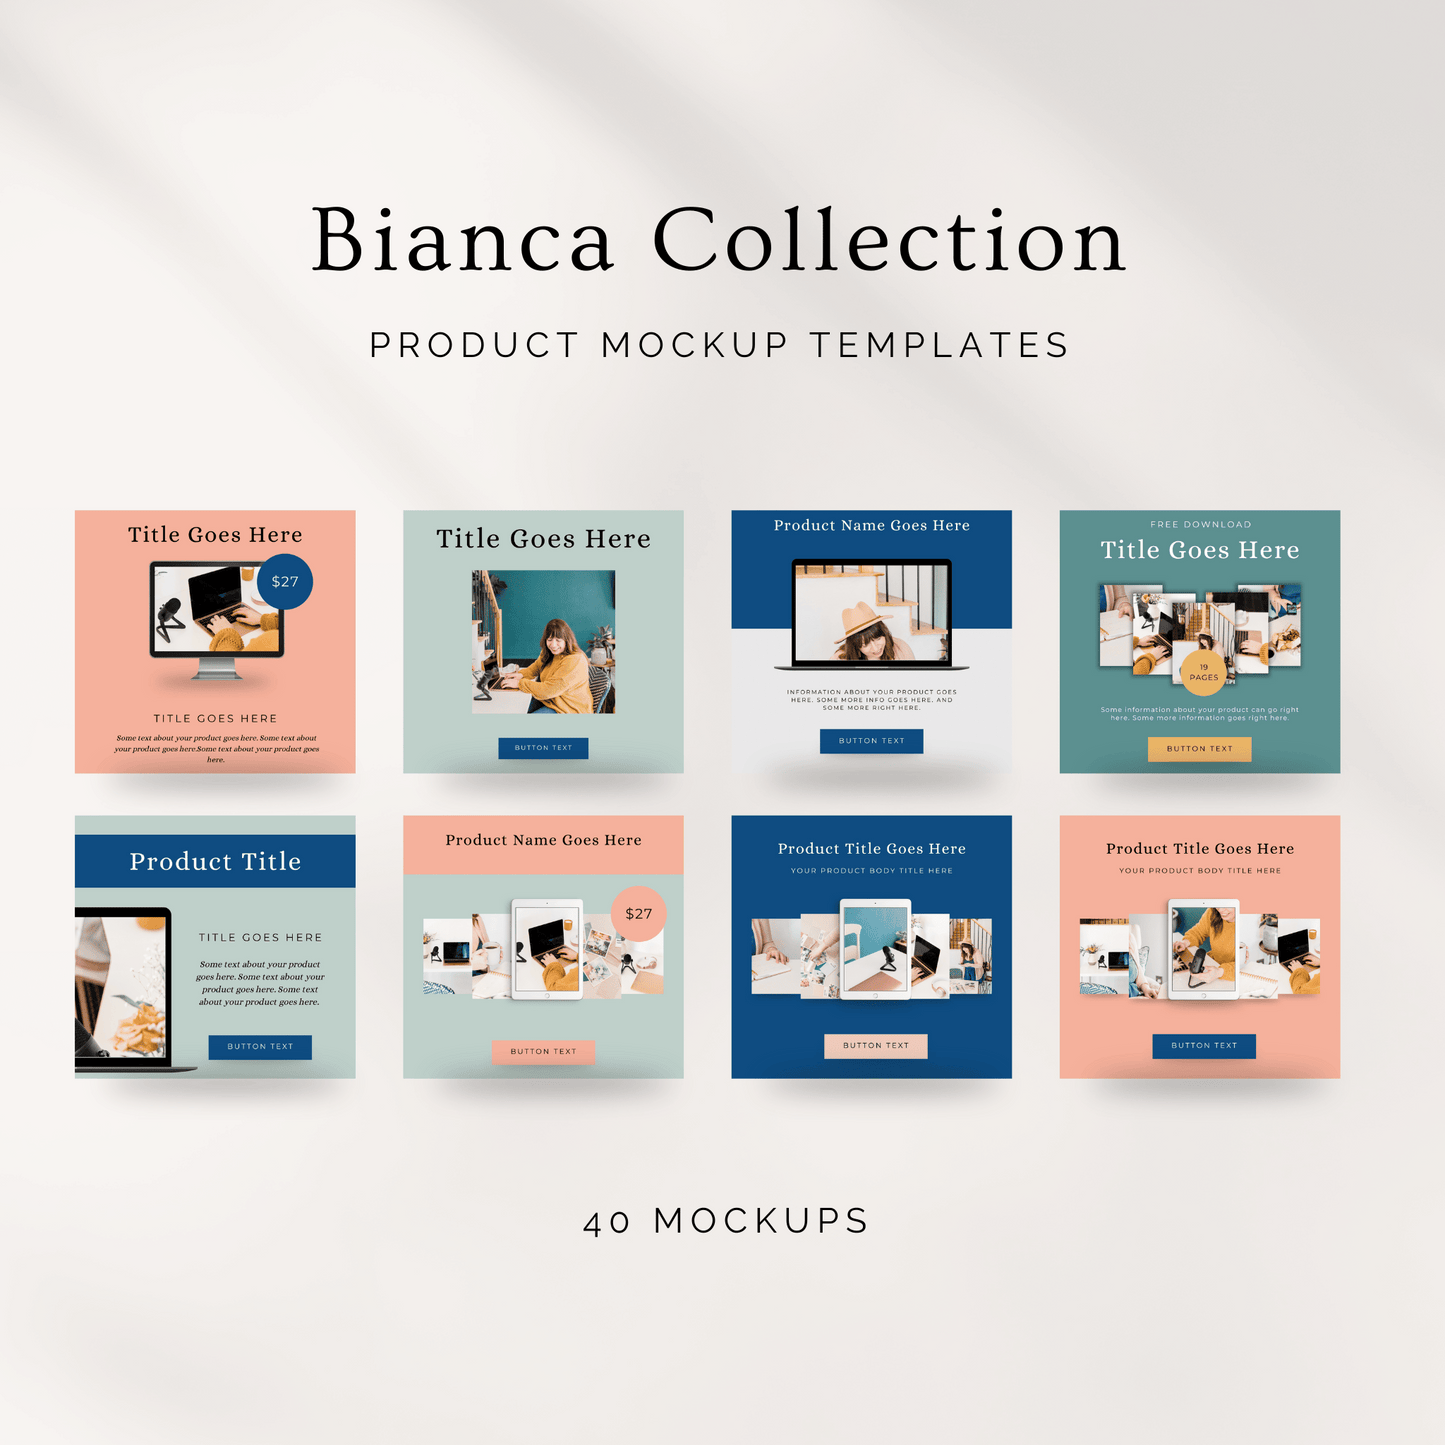 Bianca Collection Canva Product Mockup Templates colorful